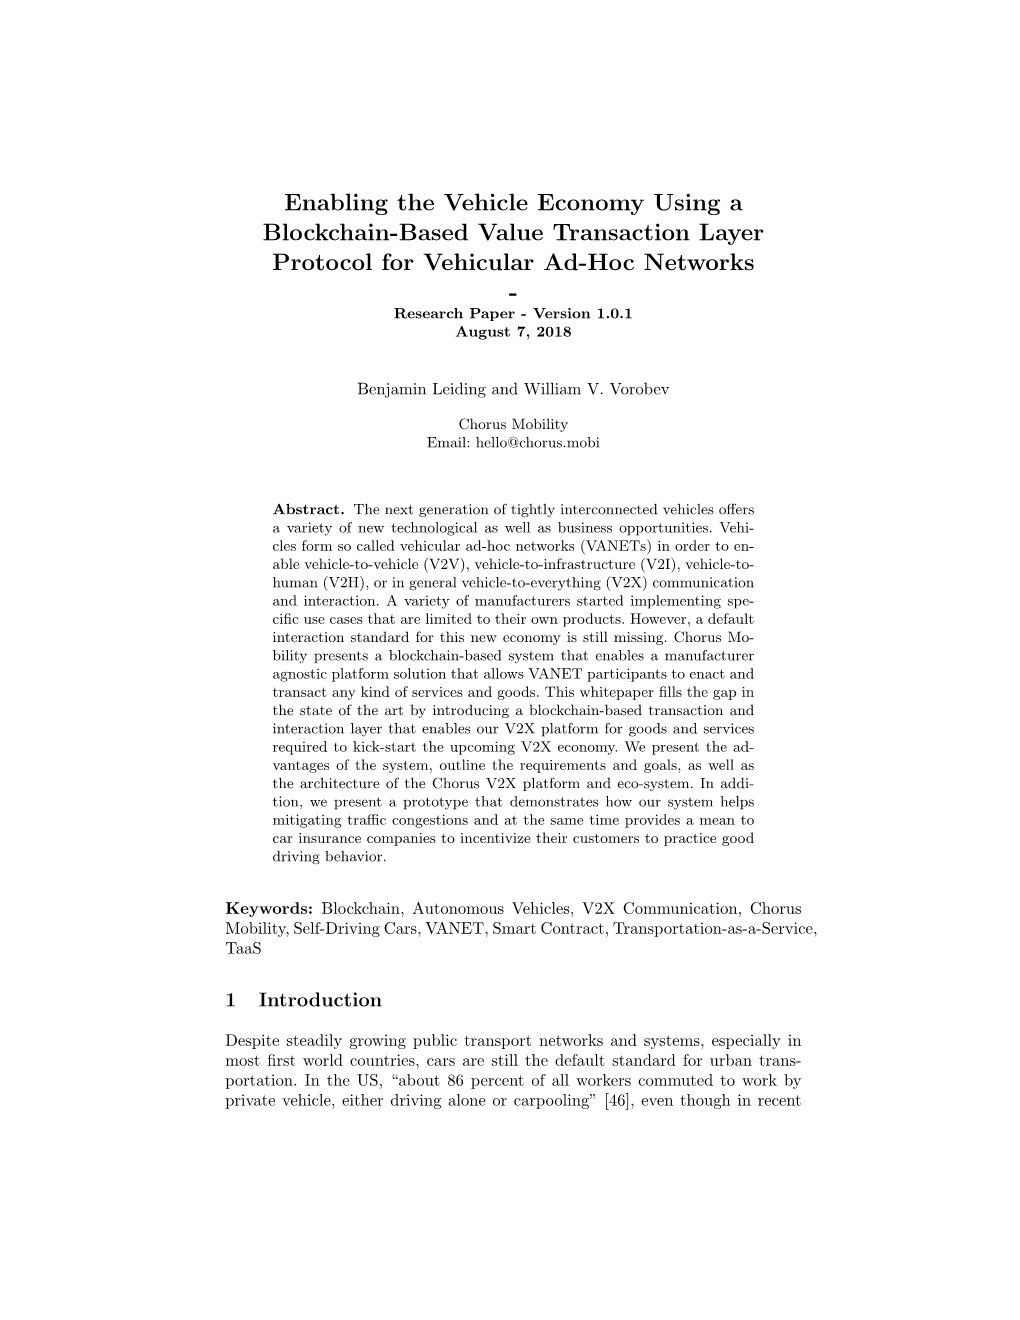 Enabling the Vehicle Economy Using a Blockchain-Based Value Transaction Layer Protocol for Vehicular Ad-Hoc Networks - Research Paper - Version 1.0.1 August 7, 2018